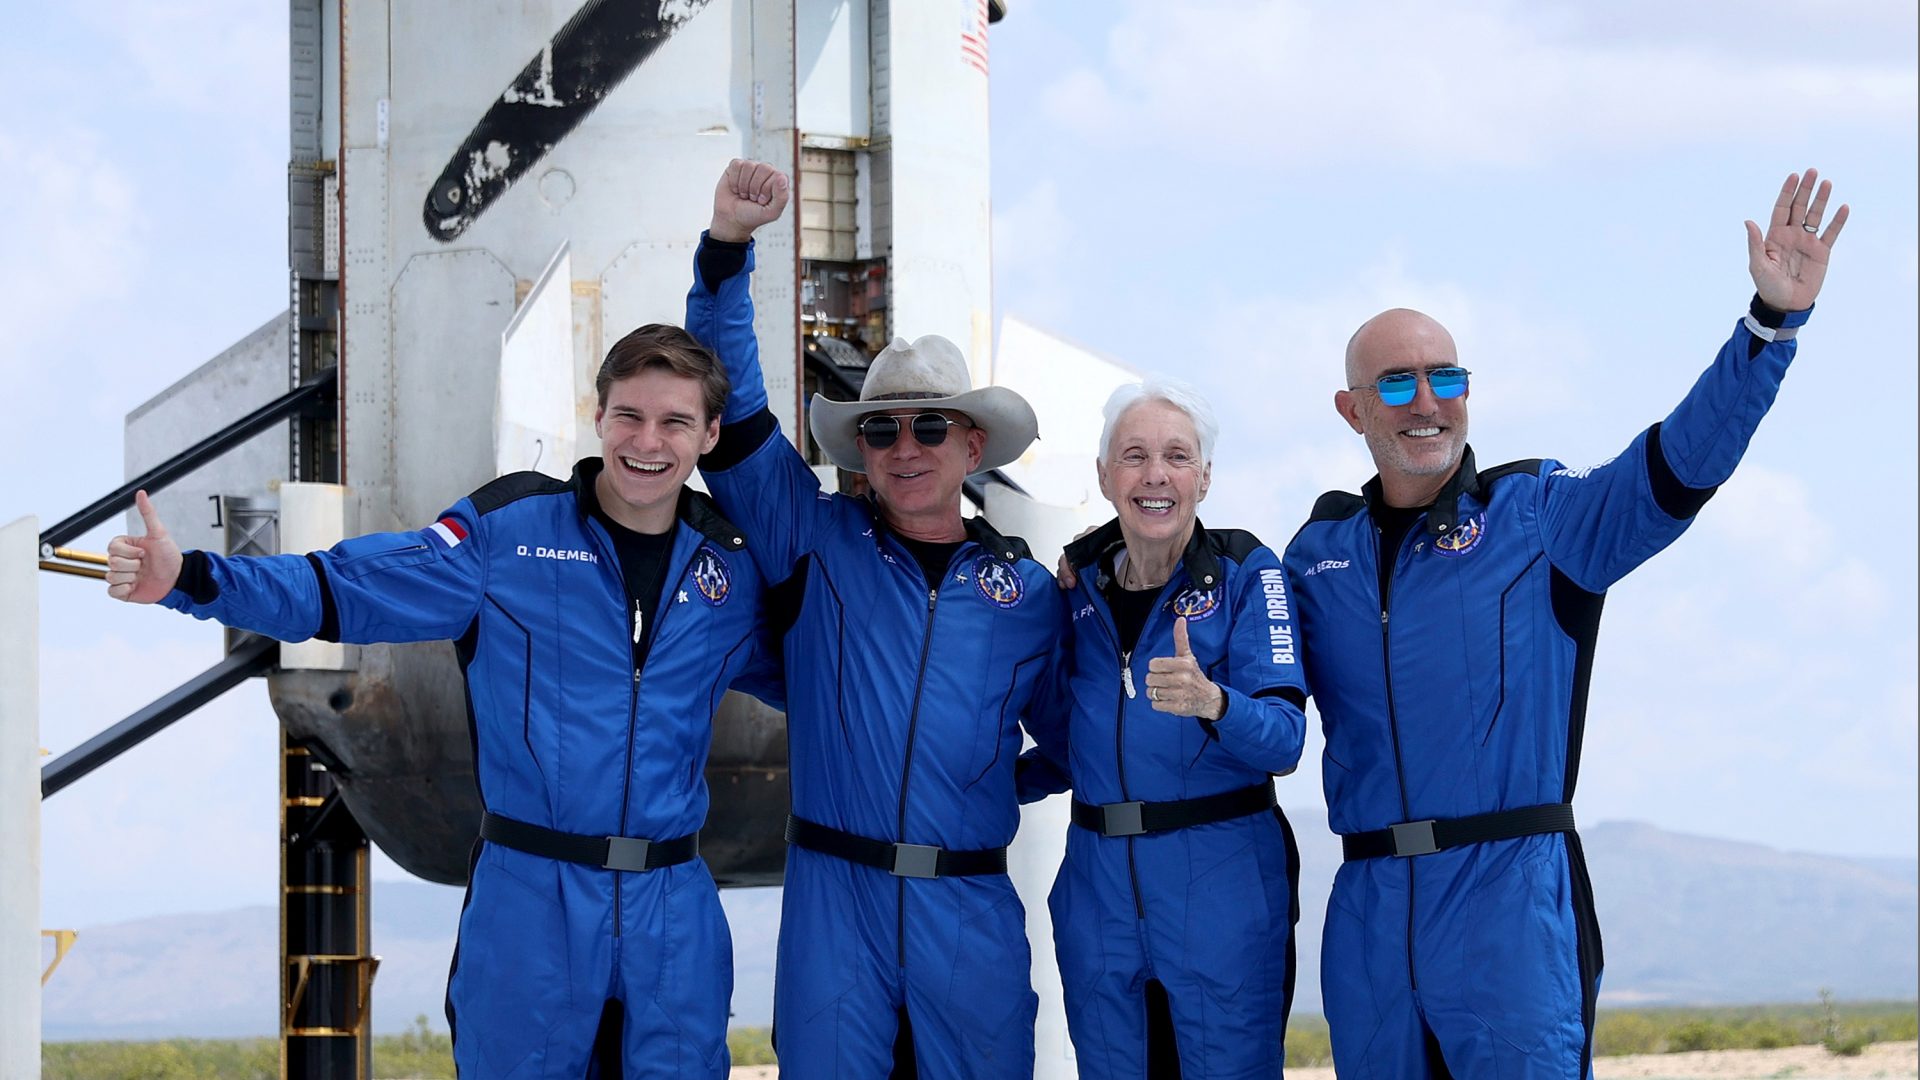 ‘Woohoo!’ Jeff Bezos and Blue Origin’s first passengers expertise their open to apartment